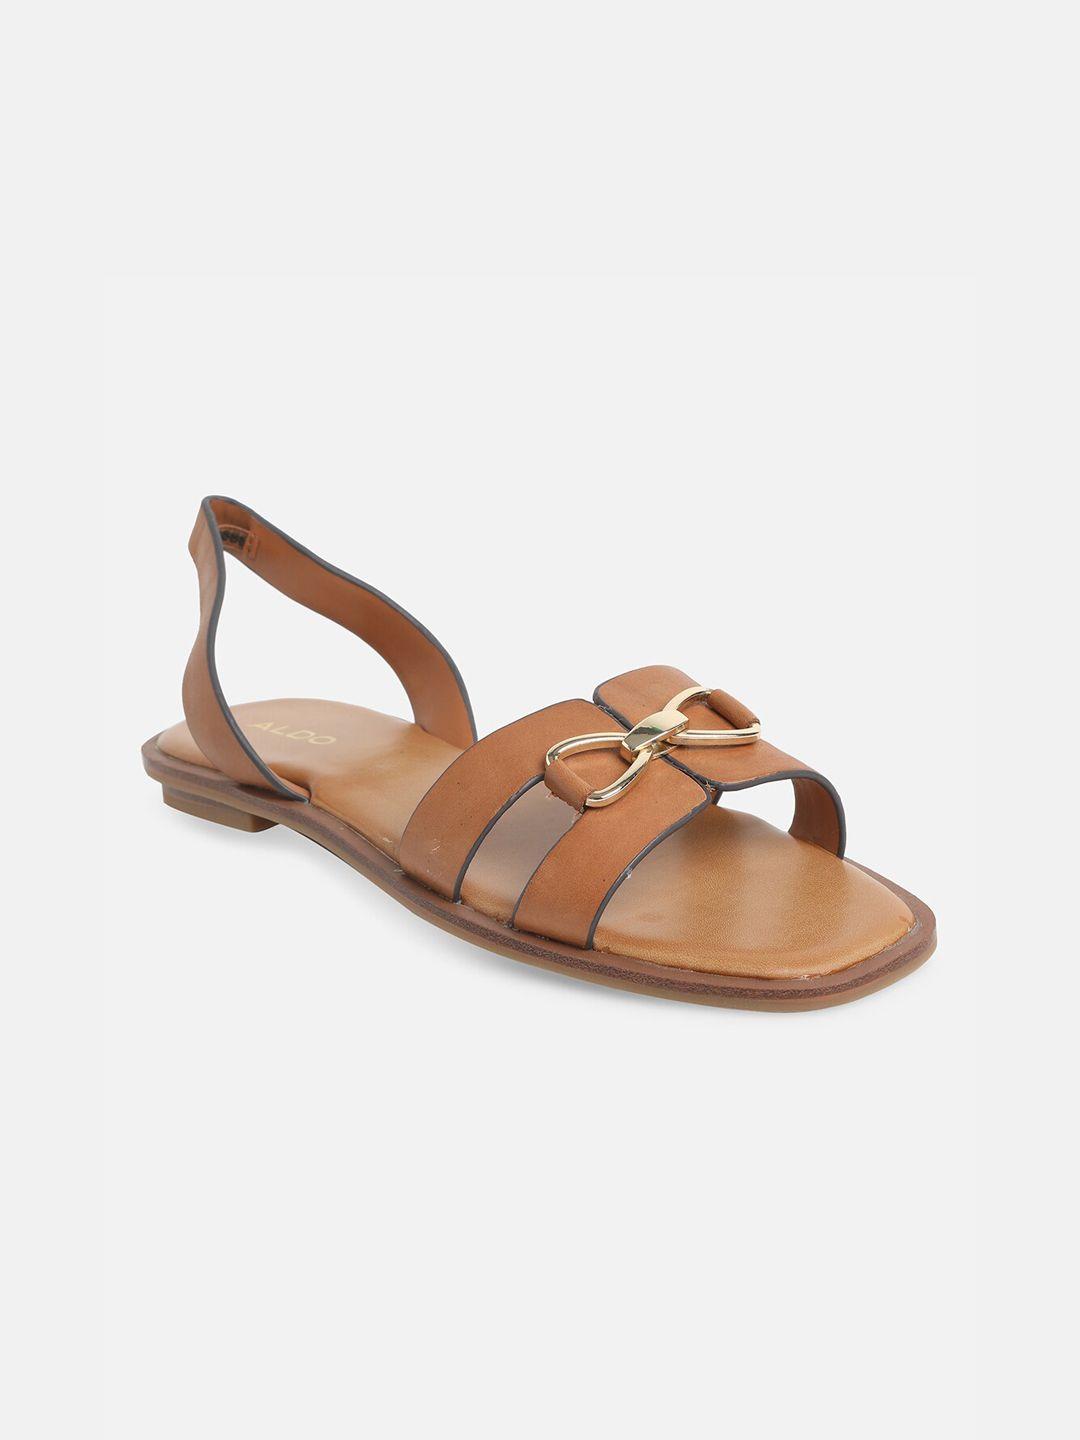 aldo-women-brown-embellished-open-toe-flats-with-bows